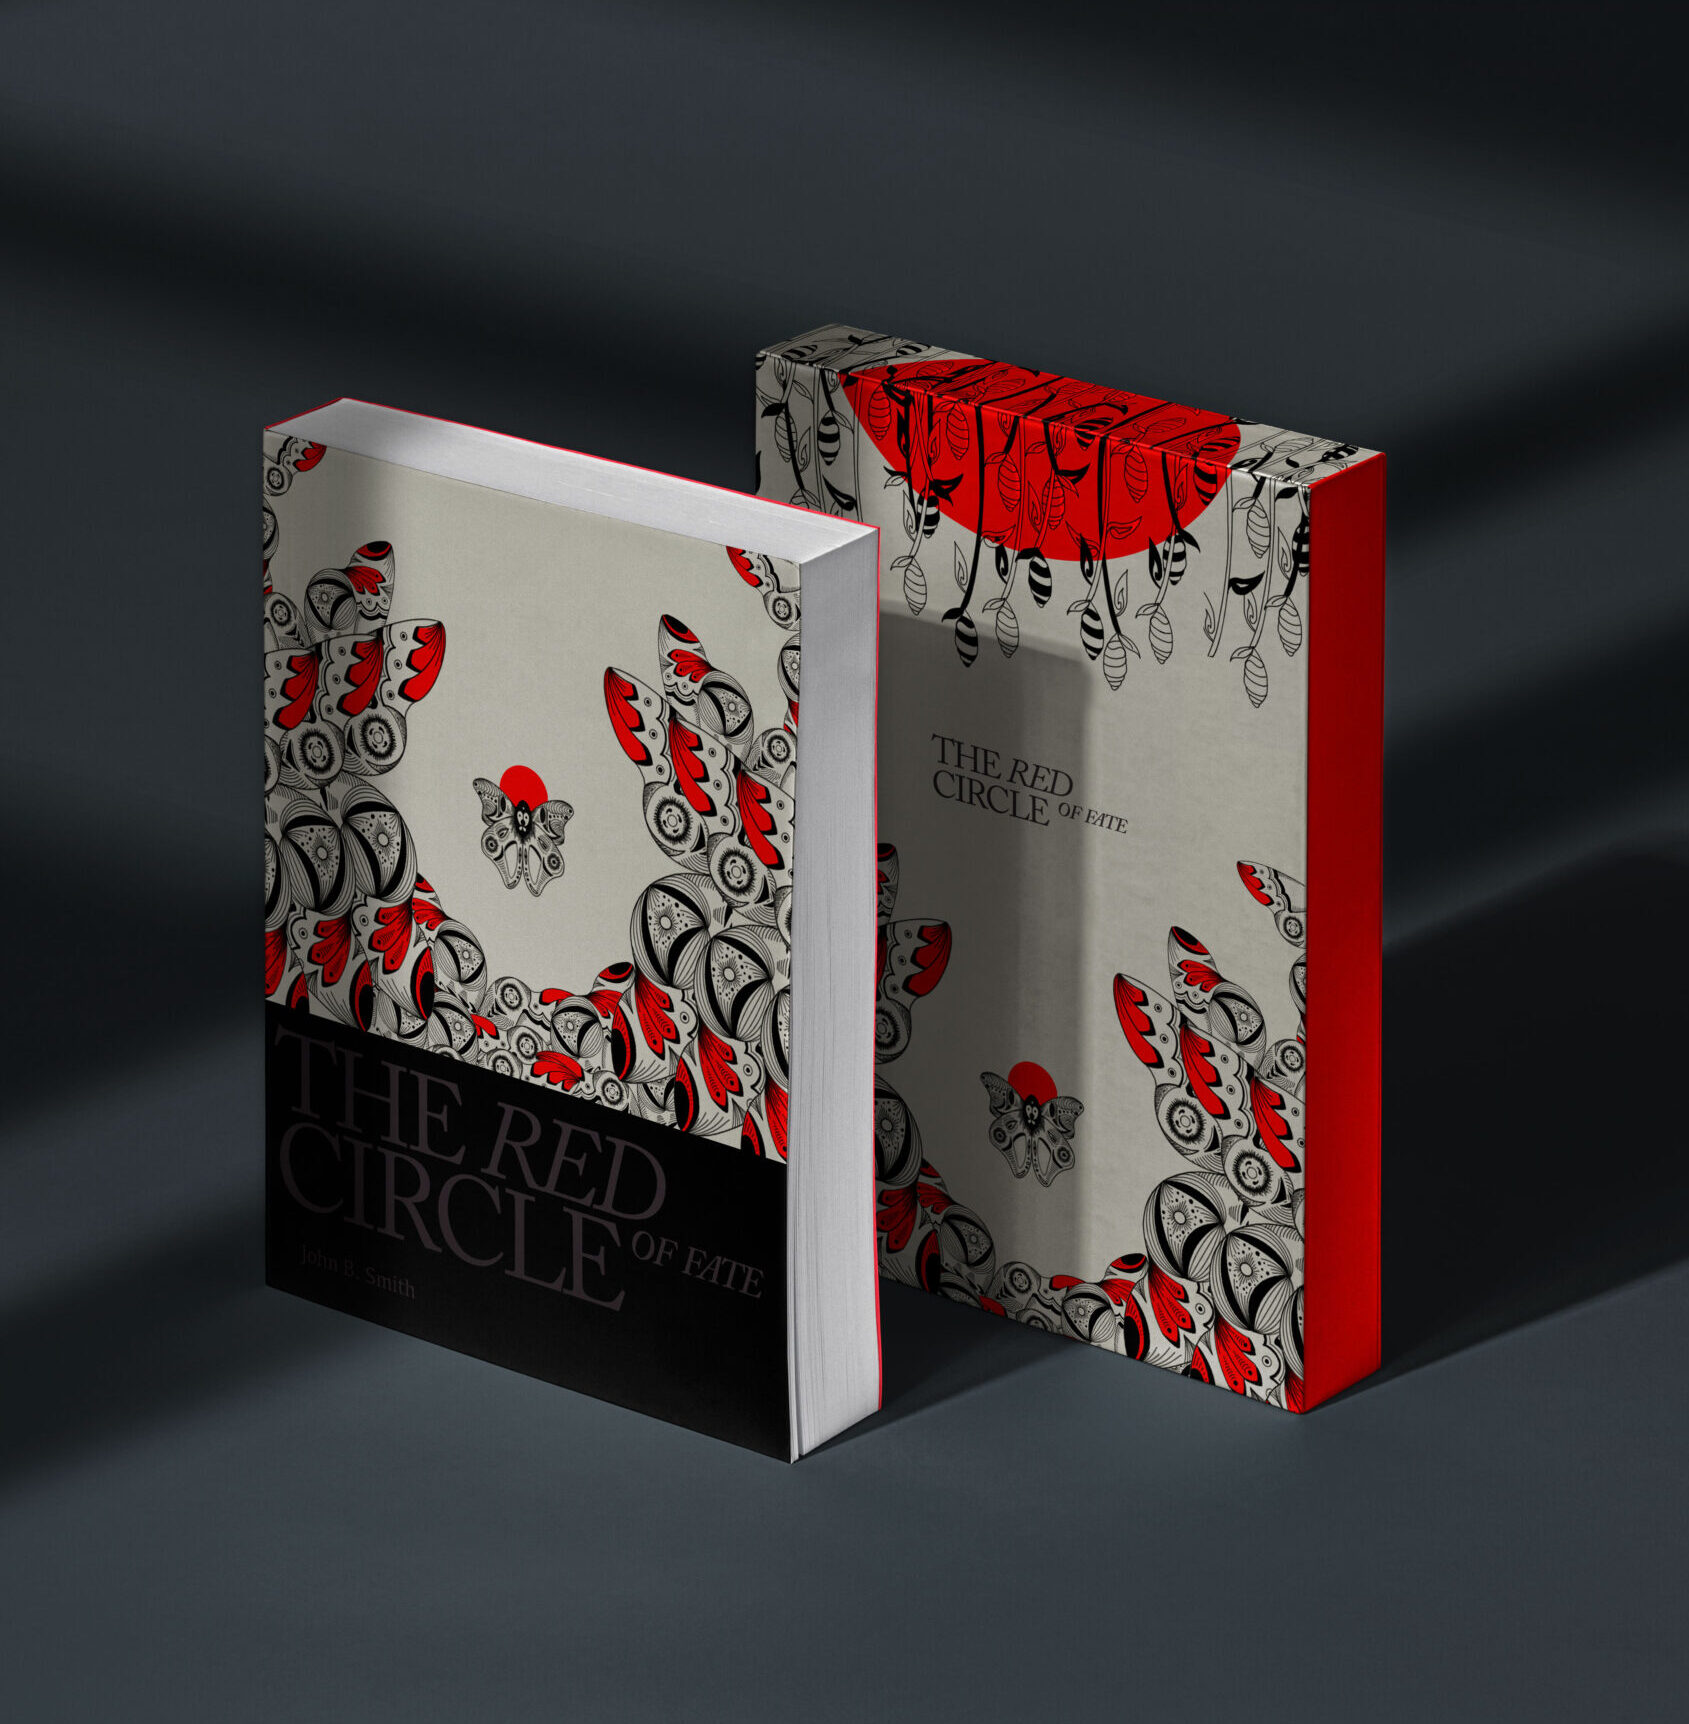 Butterfly pattern art put on a book mockup. The colour palette is red, grey and black.